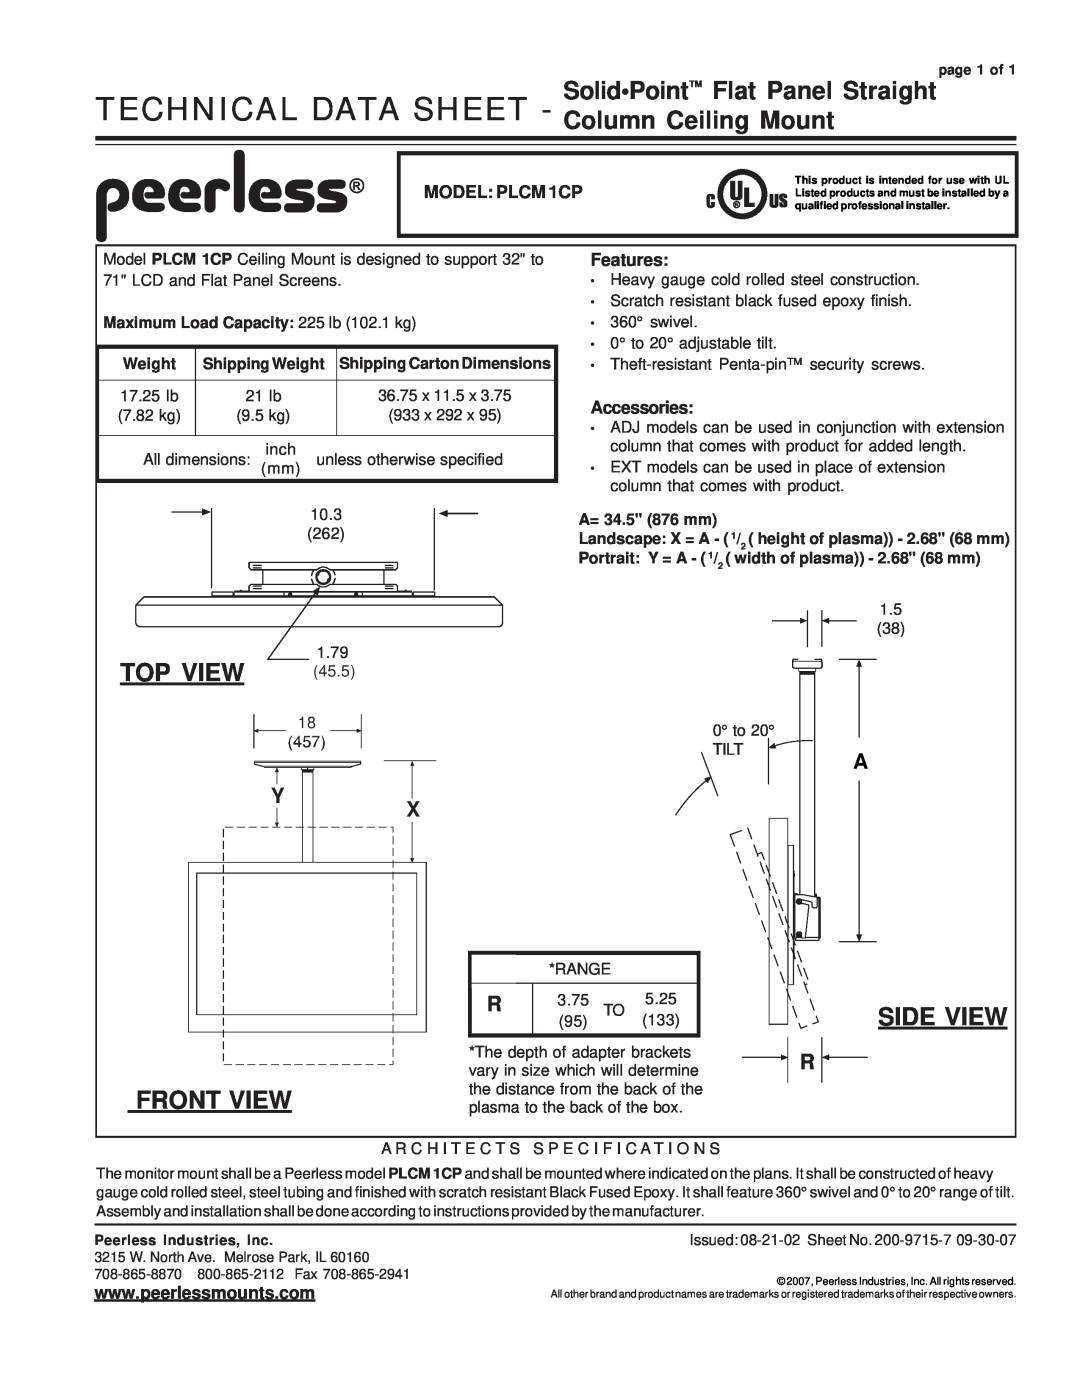 Peerless Industries PLCM1CP specifications Top View, Front View, Side View, MODEL PLCM 1CP, Features, Accessories, Weight 